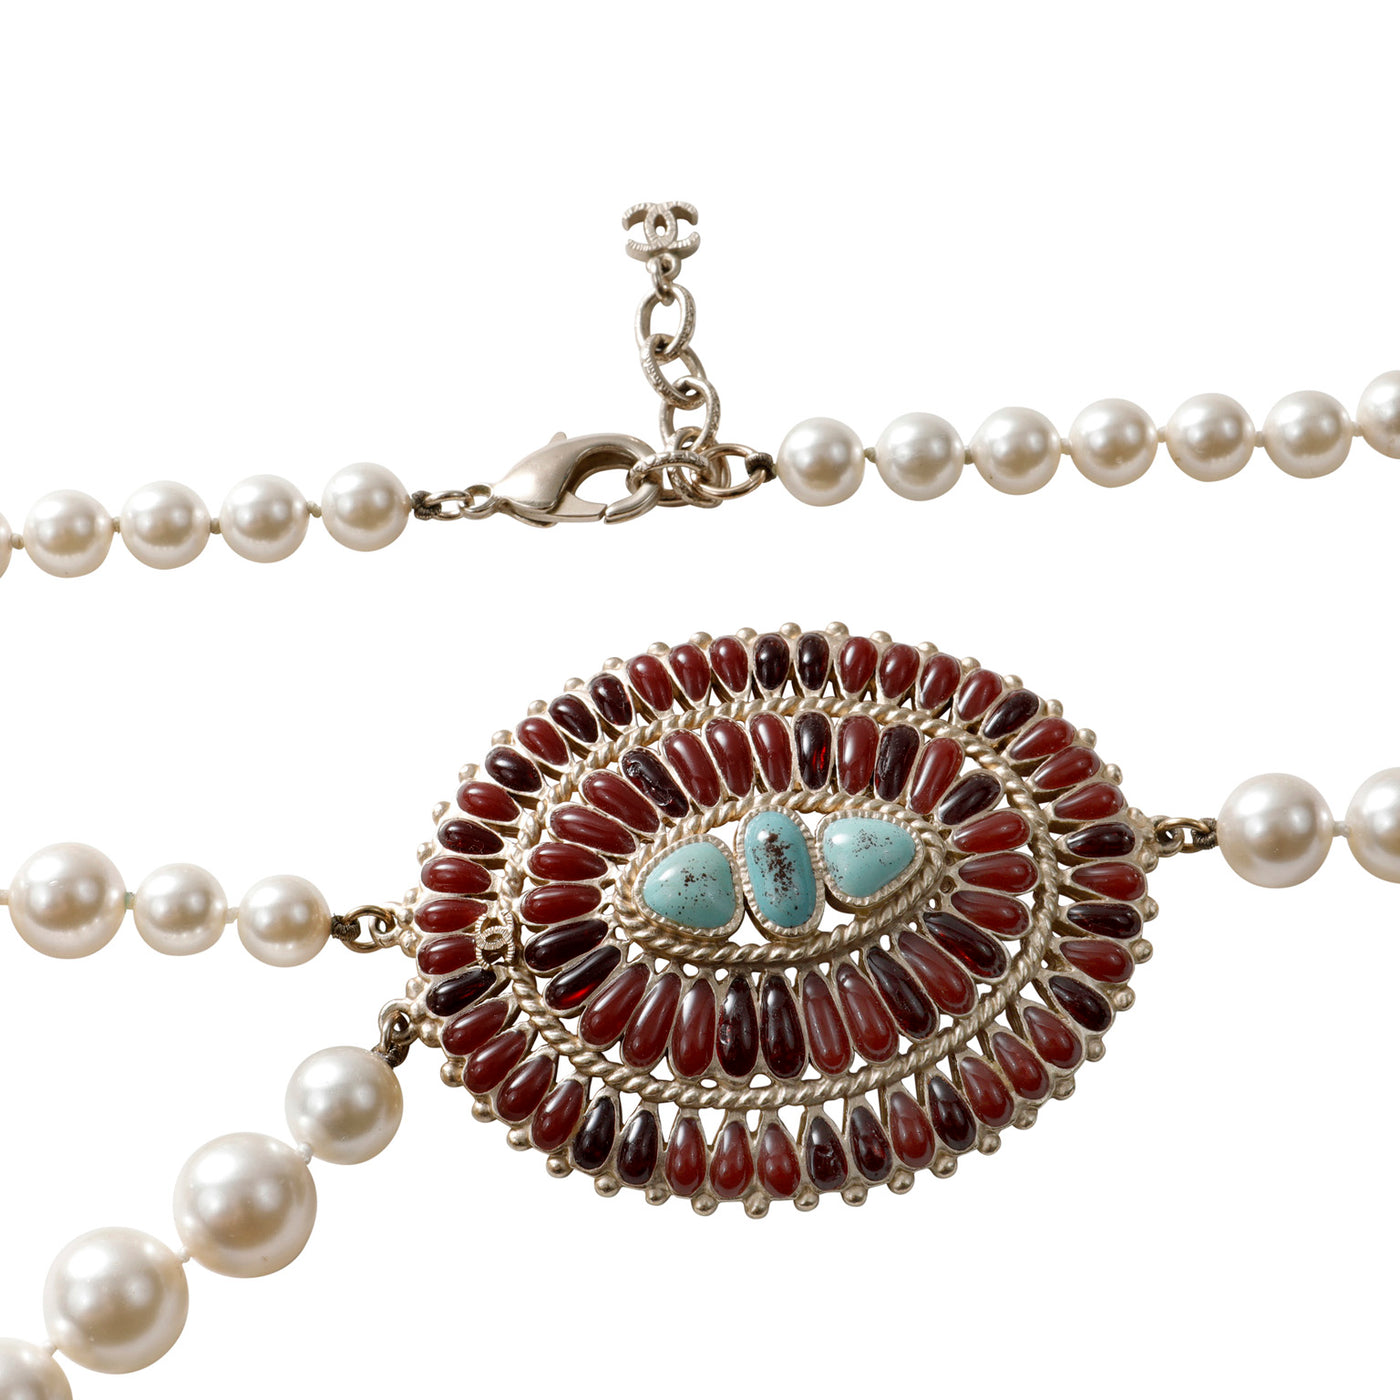 Chanel Pearl Necklace with Turquoise and Coral